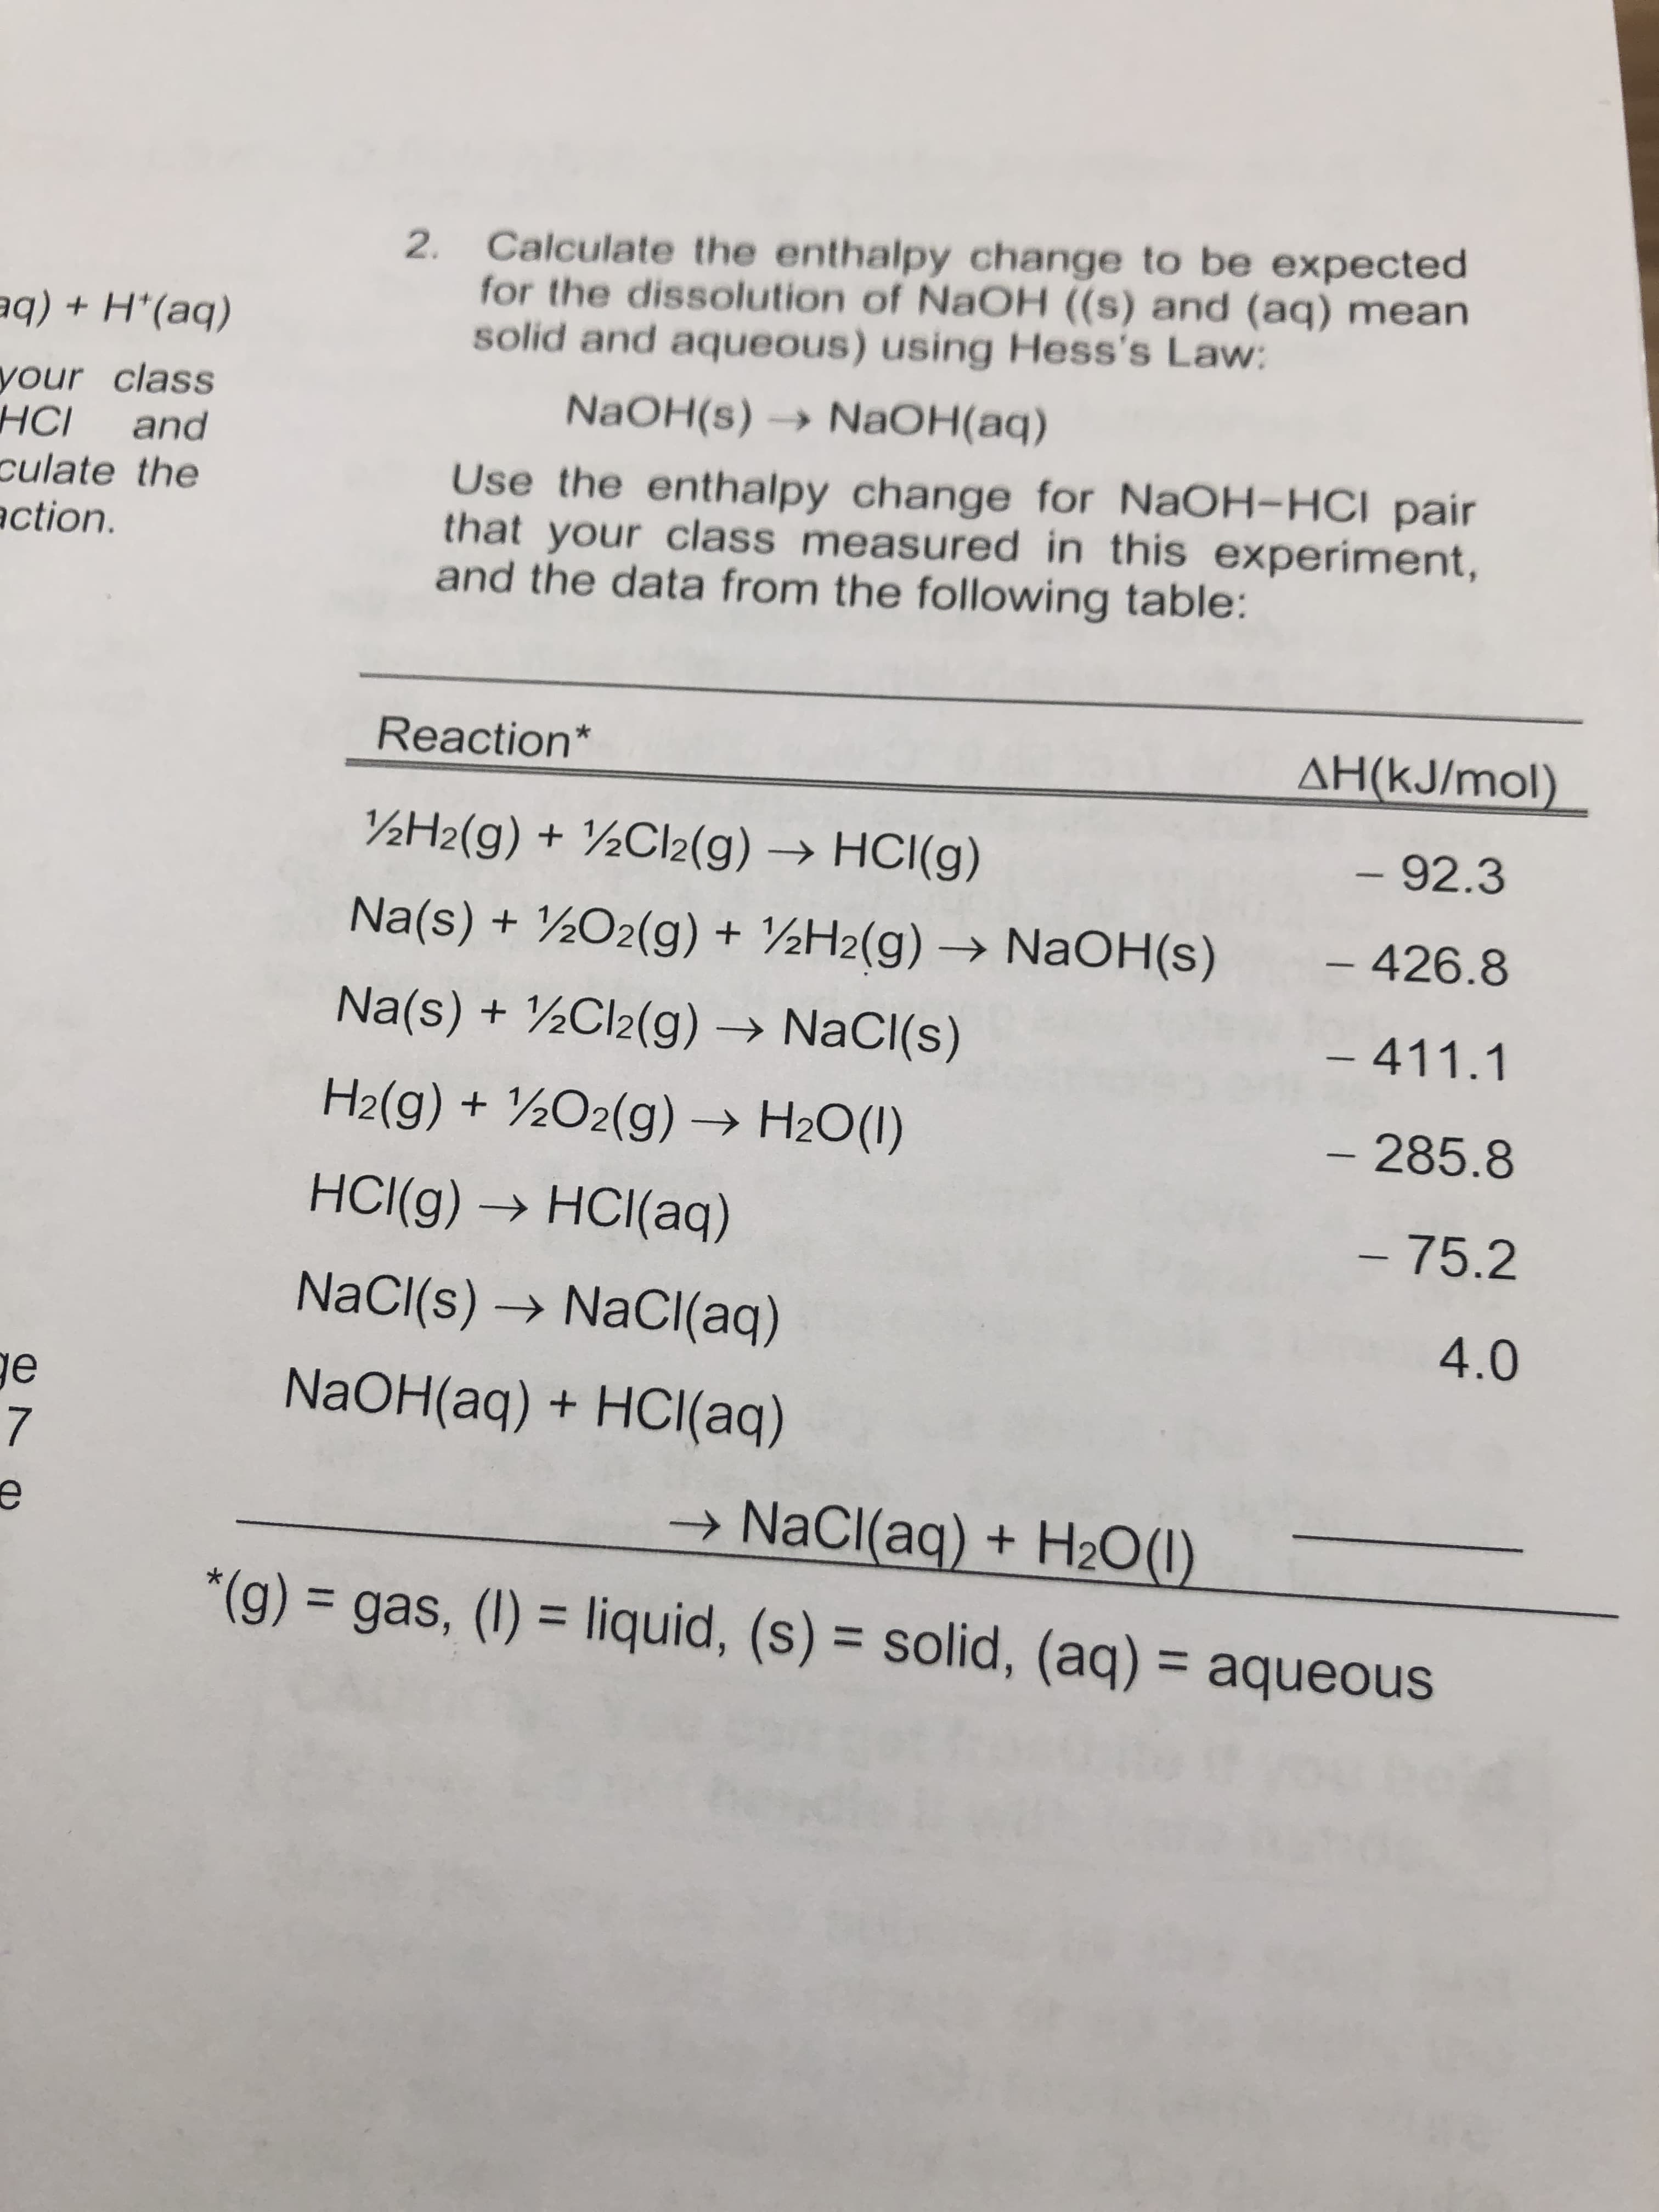 2. Calculate the enthalpy change to be expected
for the dissolution of NaOH ((s) and (aq) mean
solid and aqueous) using Hess's Law:
q + H*(aq)
your class
and
NaOH(s) → NAOH(aq)
НСІ
culate the
action.
Use the enthalpy change for NaOH-HCI pair
that your class measured in this experiment,
and the data from the following table:
Reaction*
AH(kJ/mol)
½H2(g) + ½CI2(g) → HCI(g)
- 92.3
Na(s) + ½O2(g) + ½H2(g) → NaOH(s)
–426.8
Na(s) + ½CI2(g) → NaCI(s)
– 411.1
H2(g) + ½O2(g) → H2O(1)
- 285.8
HCI(g) → HCI(aq)
-75.2
NaCI(s) → NaCI(aq)
4.0
NaOH(aq) + HCI(aq)
→ NaCl(aq) + H2O(1)
*(g) = gas, (1) = liquid, (s) = solid, (aq) = aqueous
%3D
%3D
%3D
